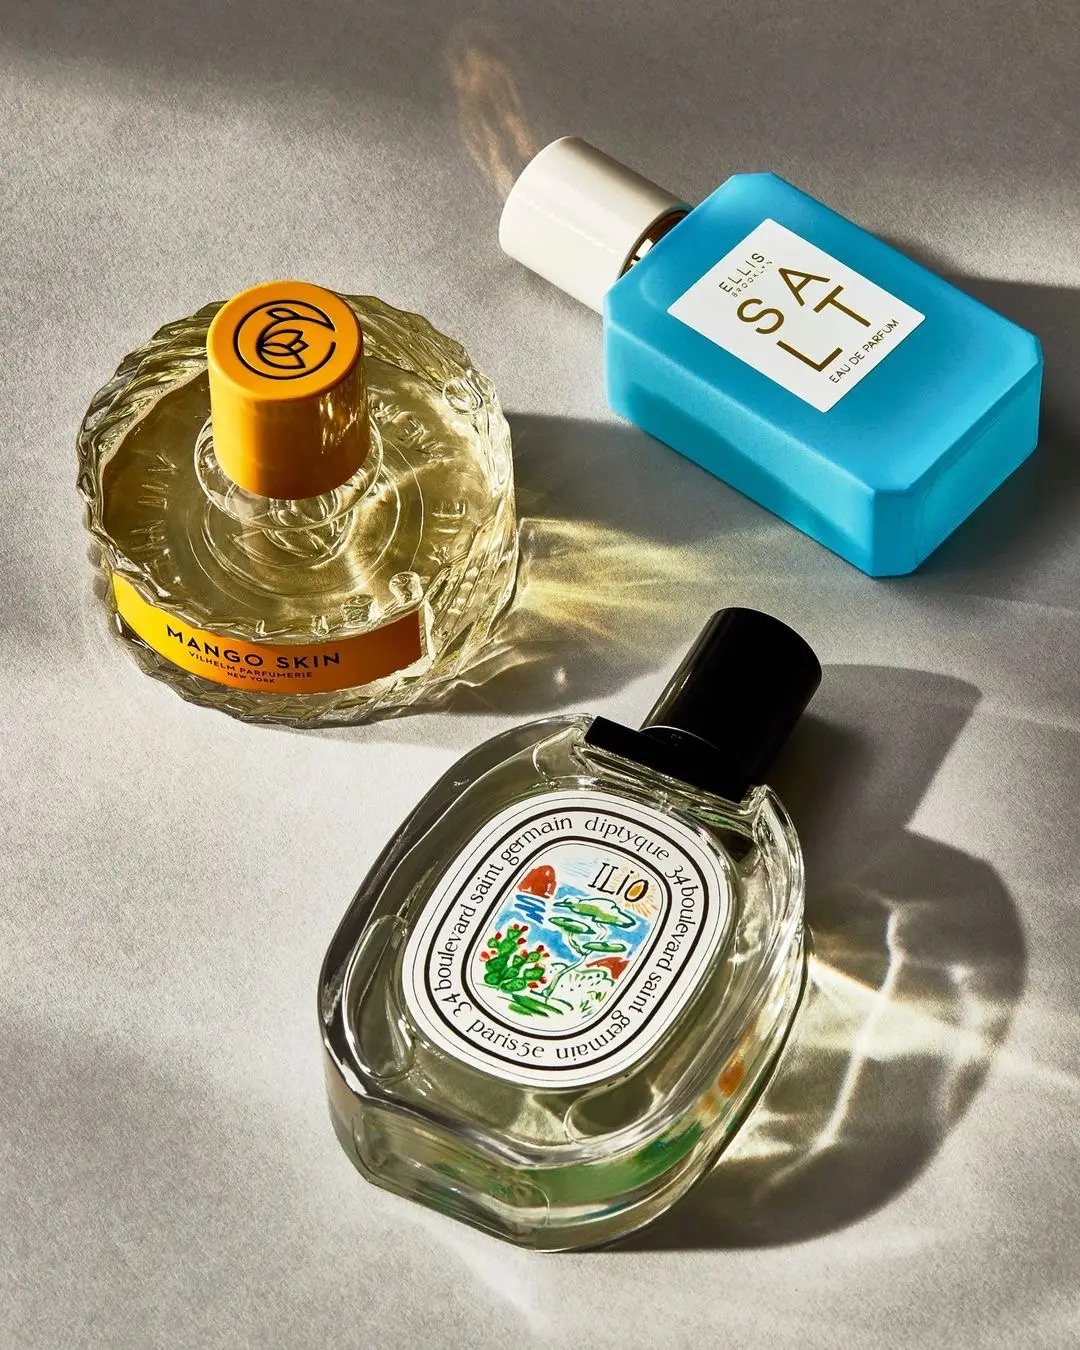 9 Signs You Love Perfume ...